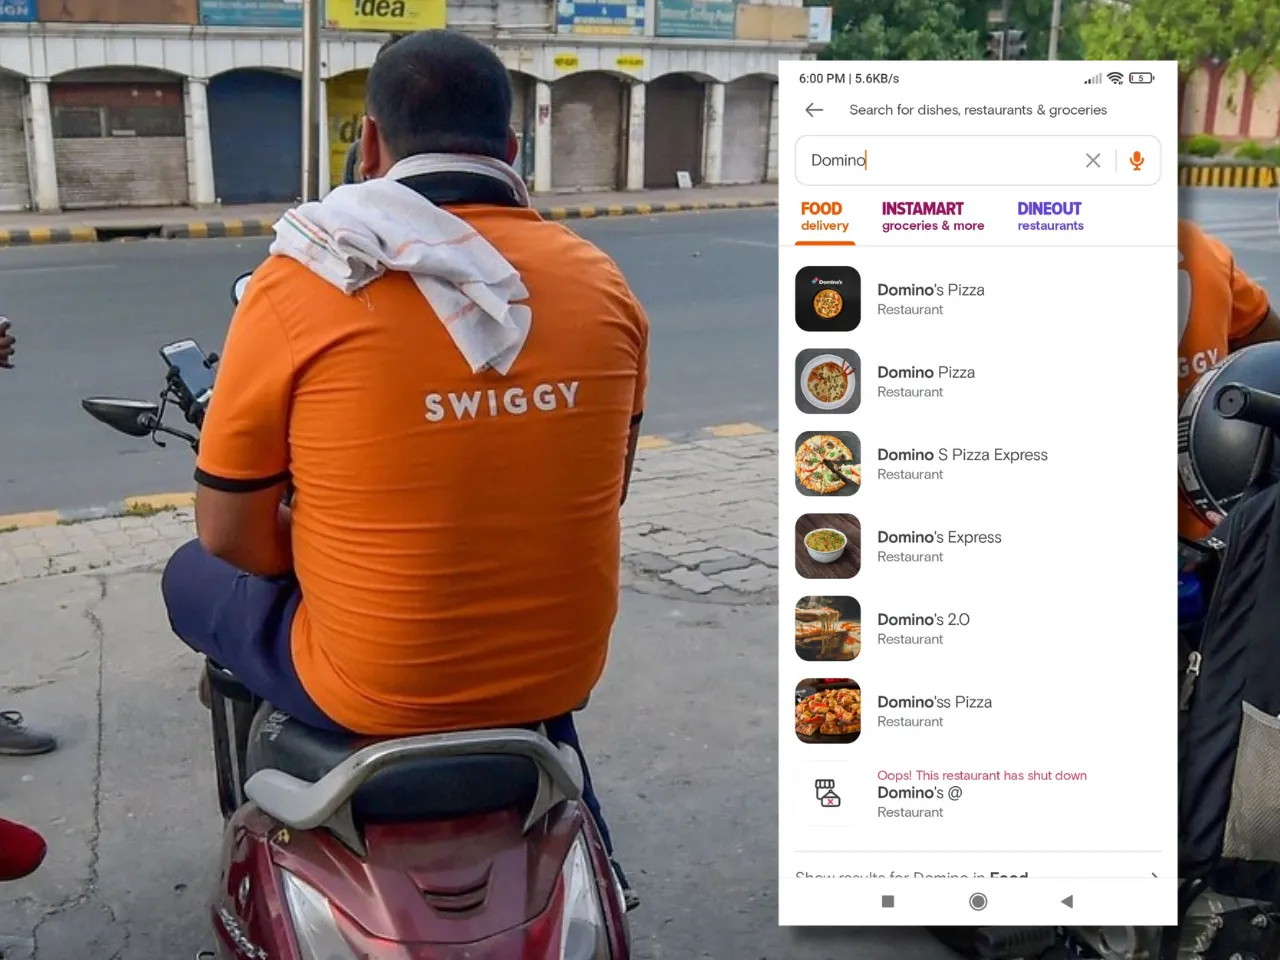 Fake Domino's Pizza outlets on Swiggy